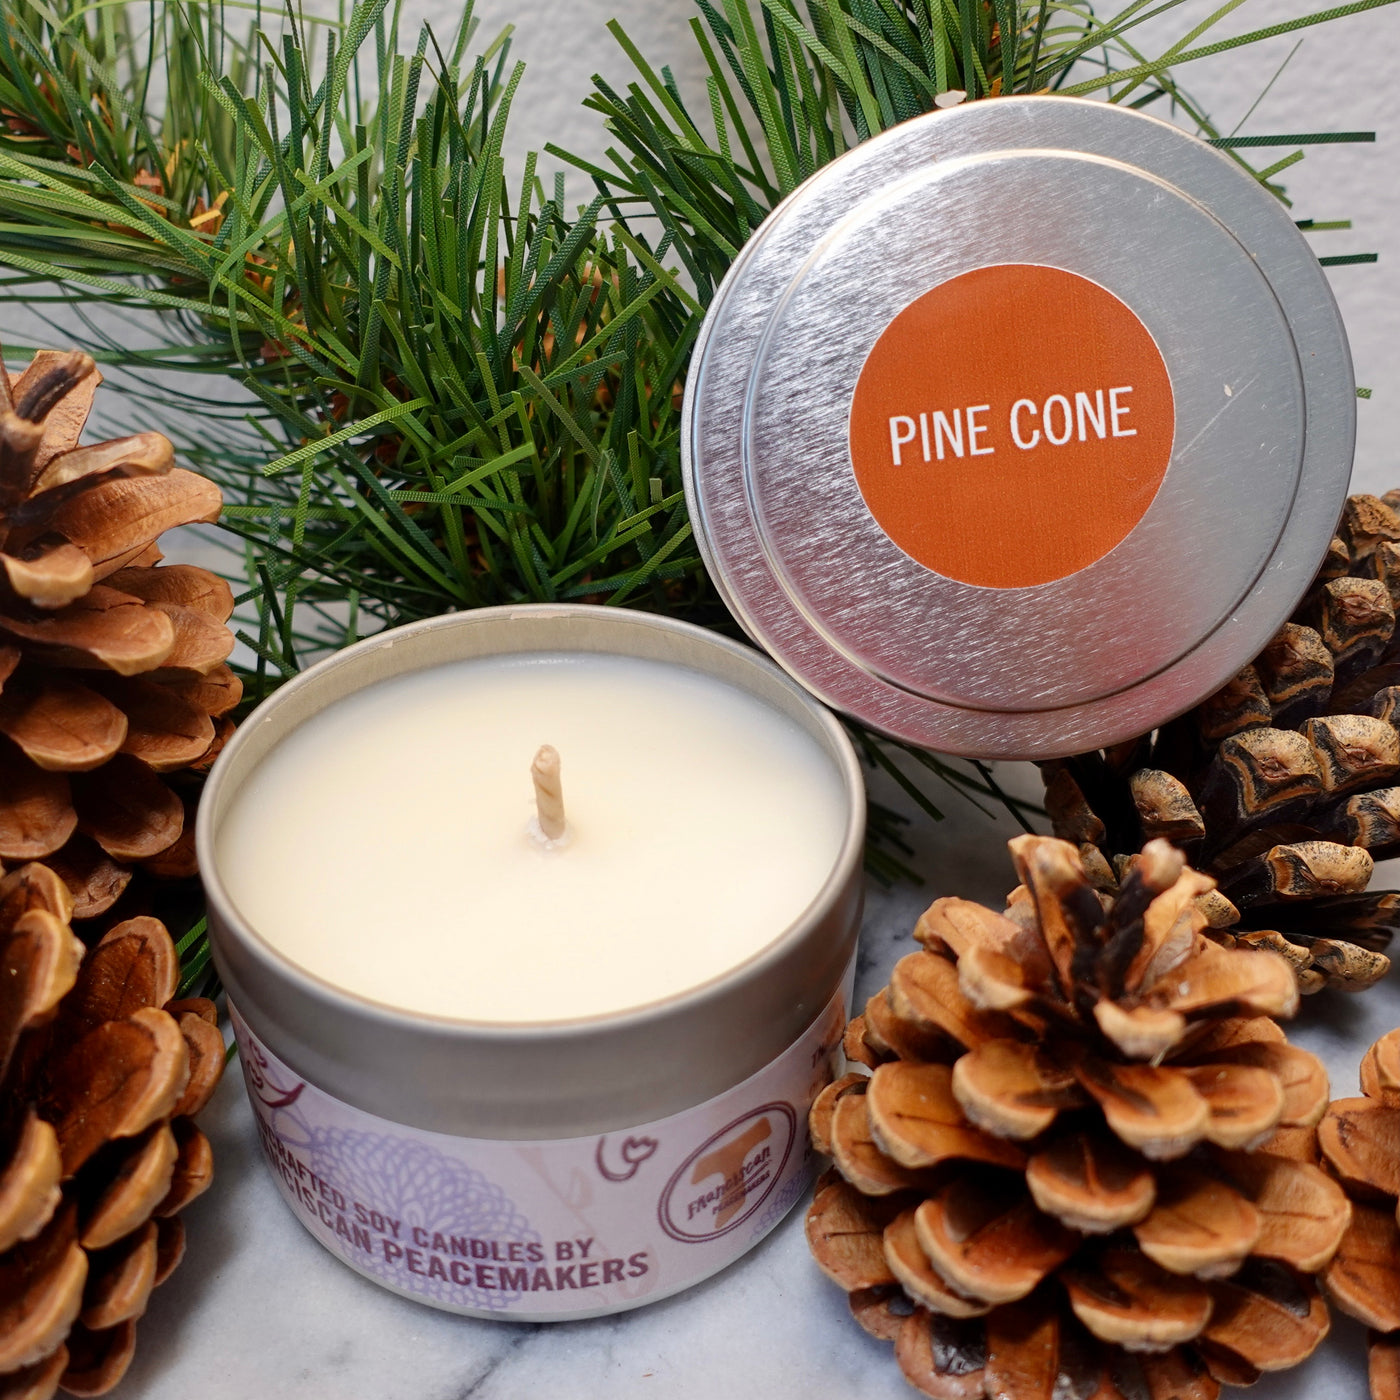 4 oz Pine Cone Soy Candle